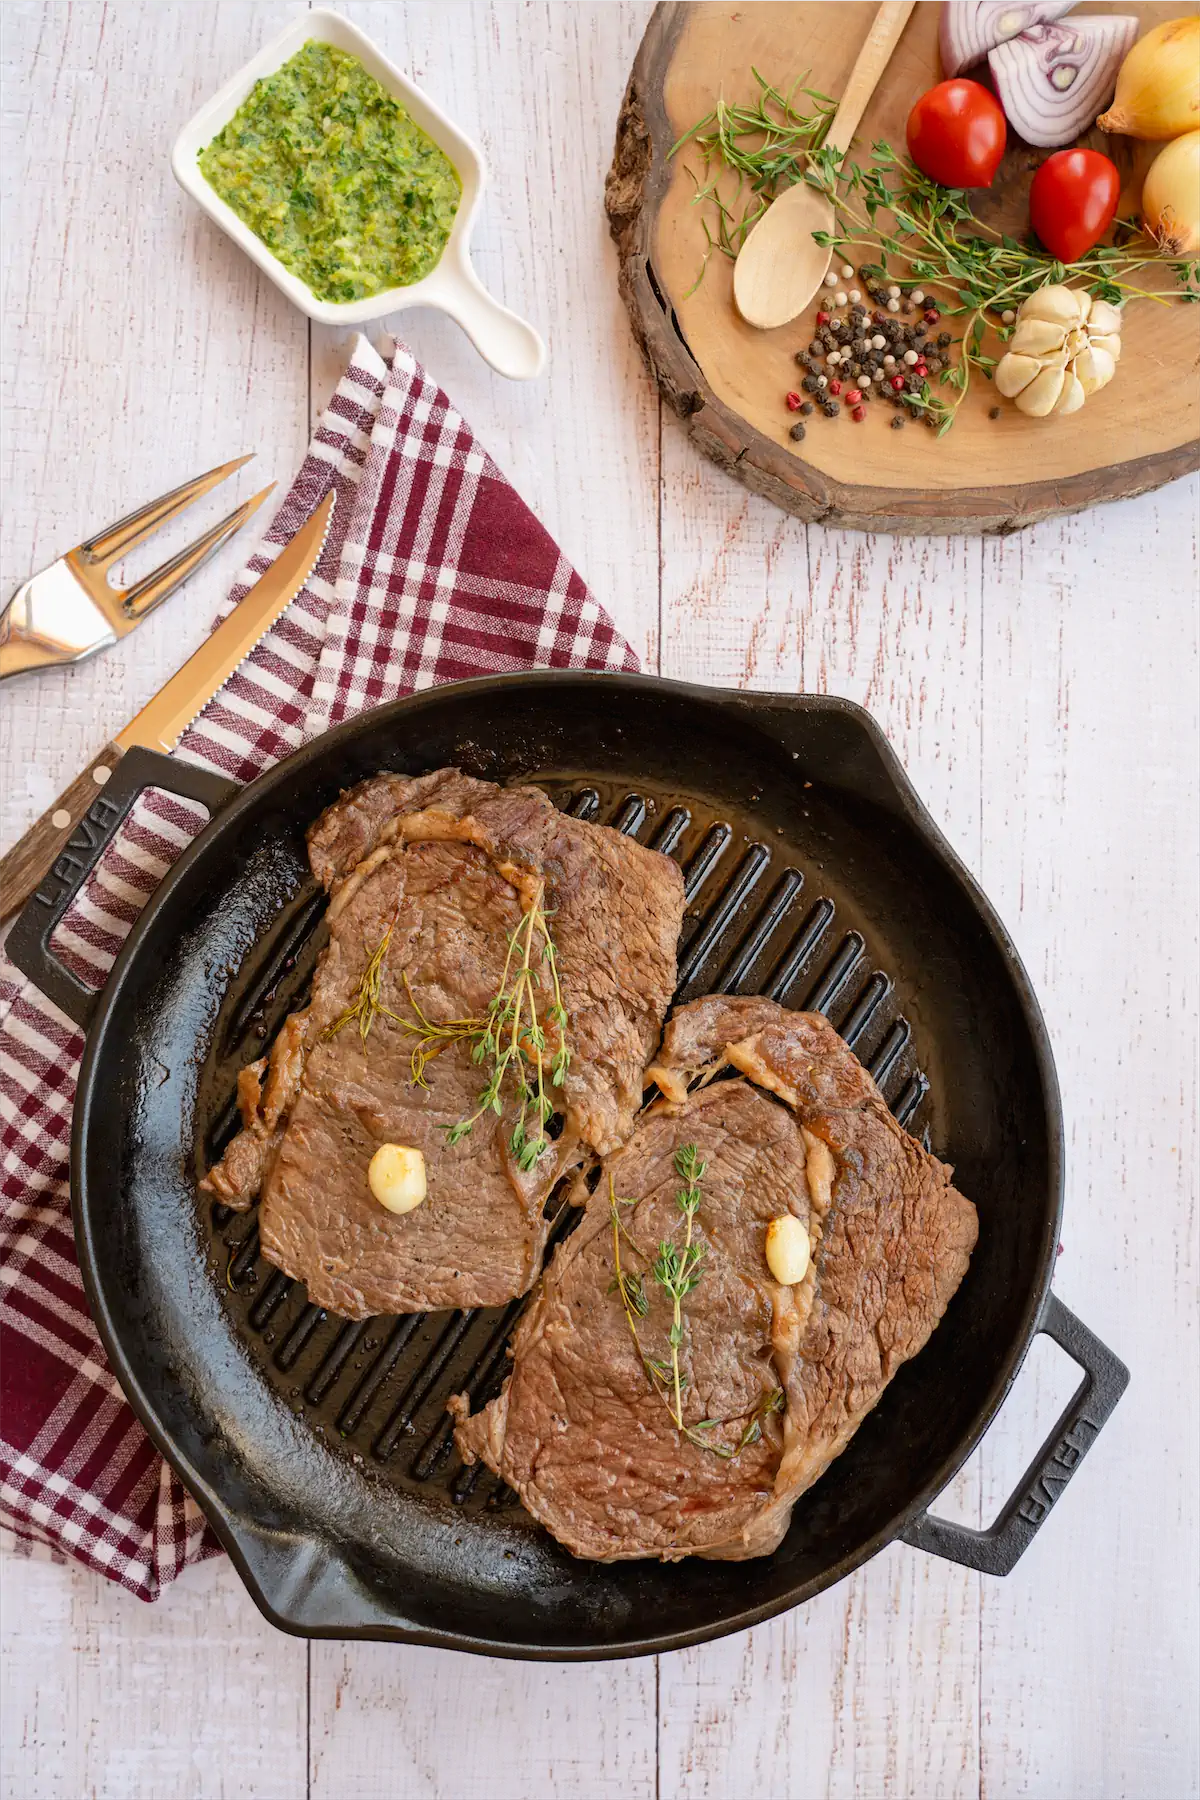 Freshly grilled sirloin steak recipe in a grill pan on kitchen table.